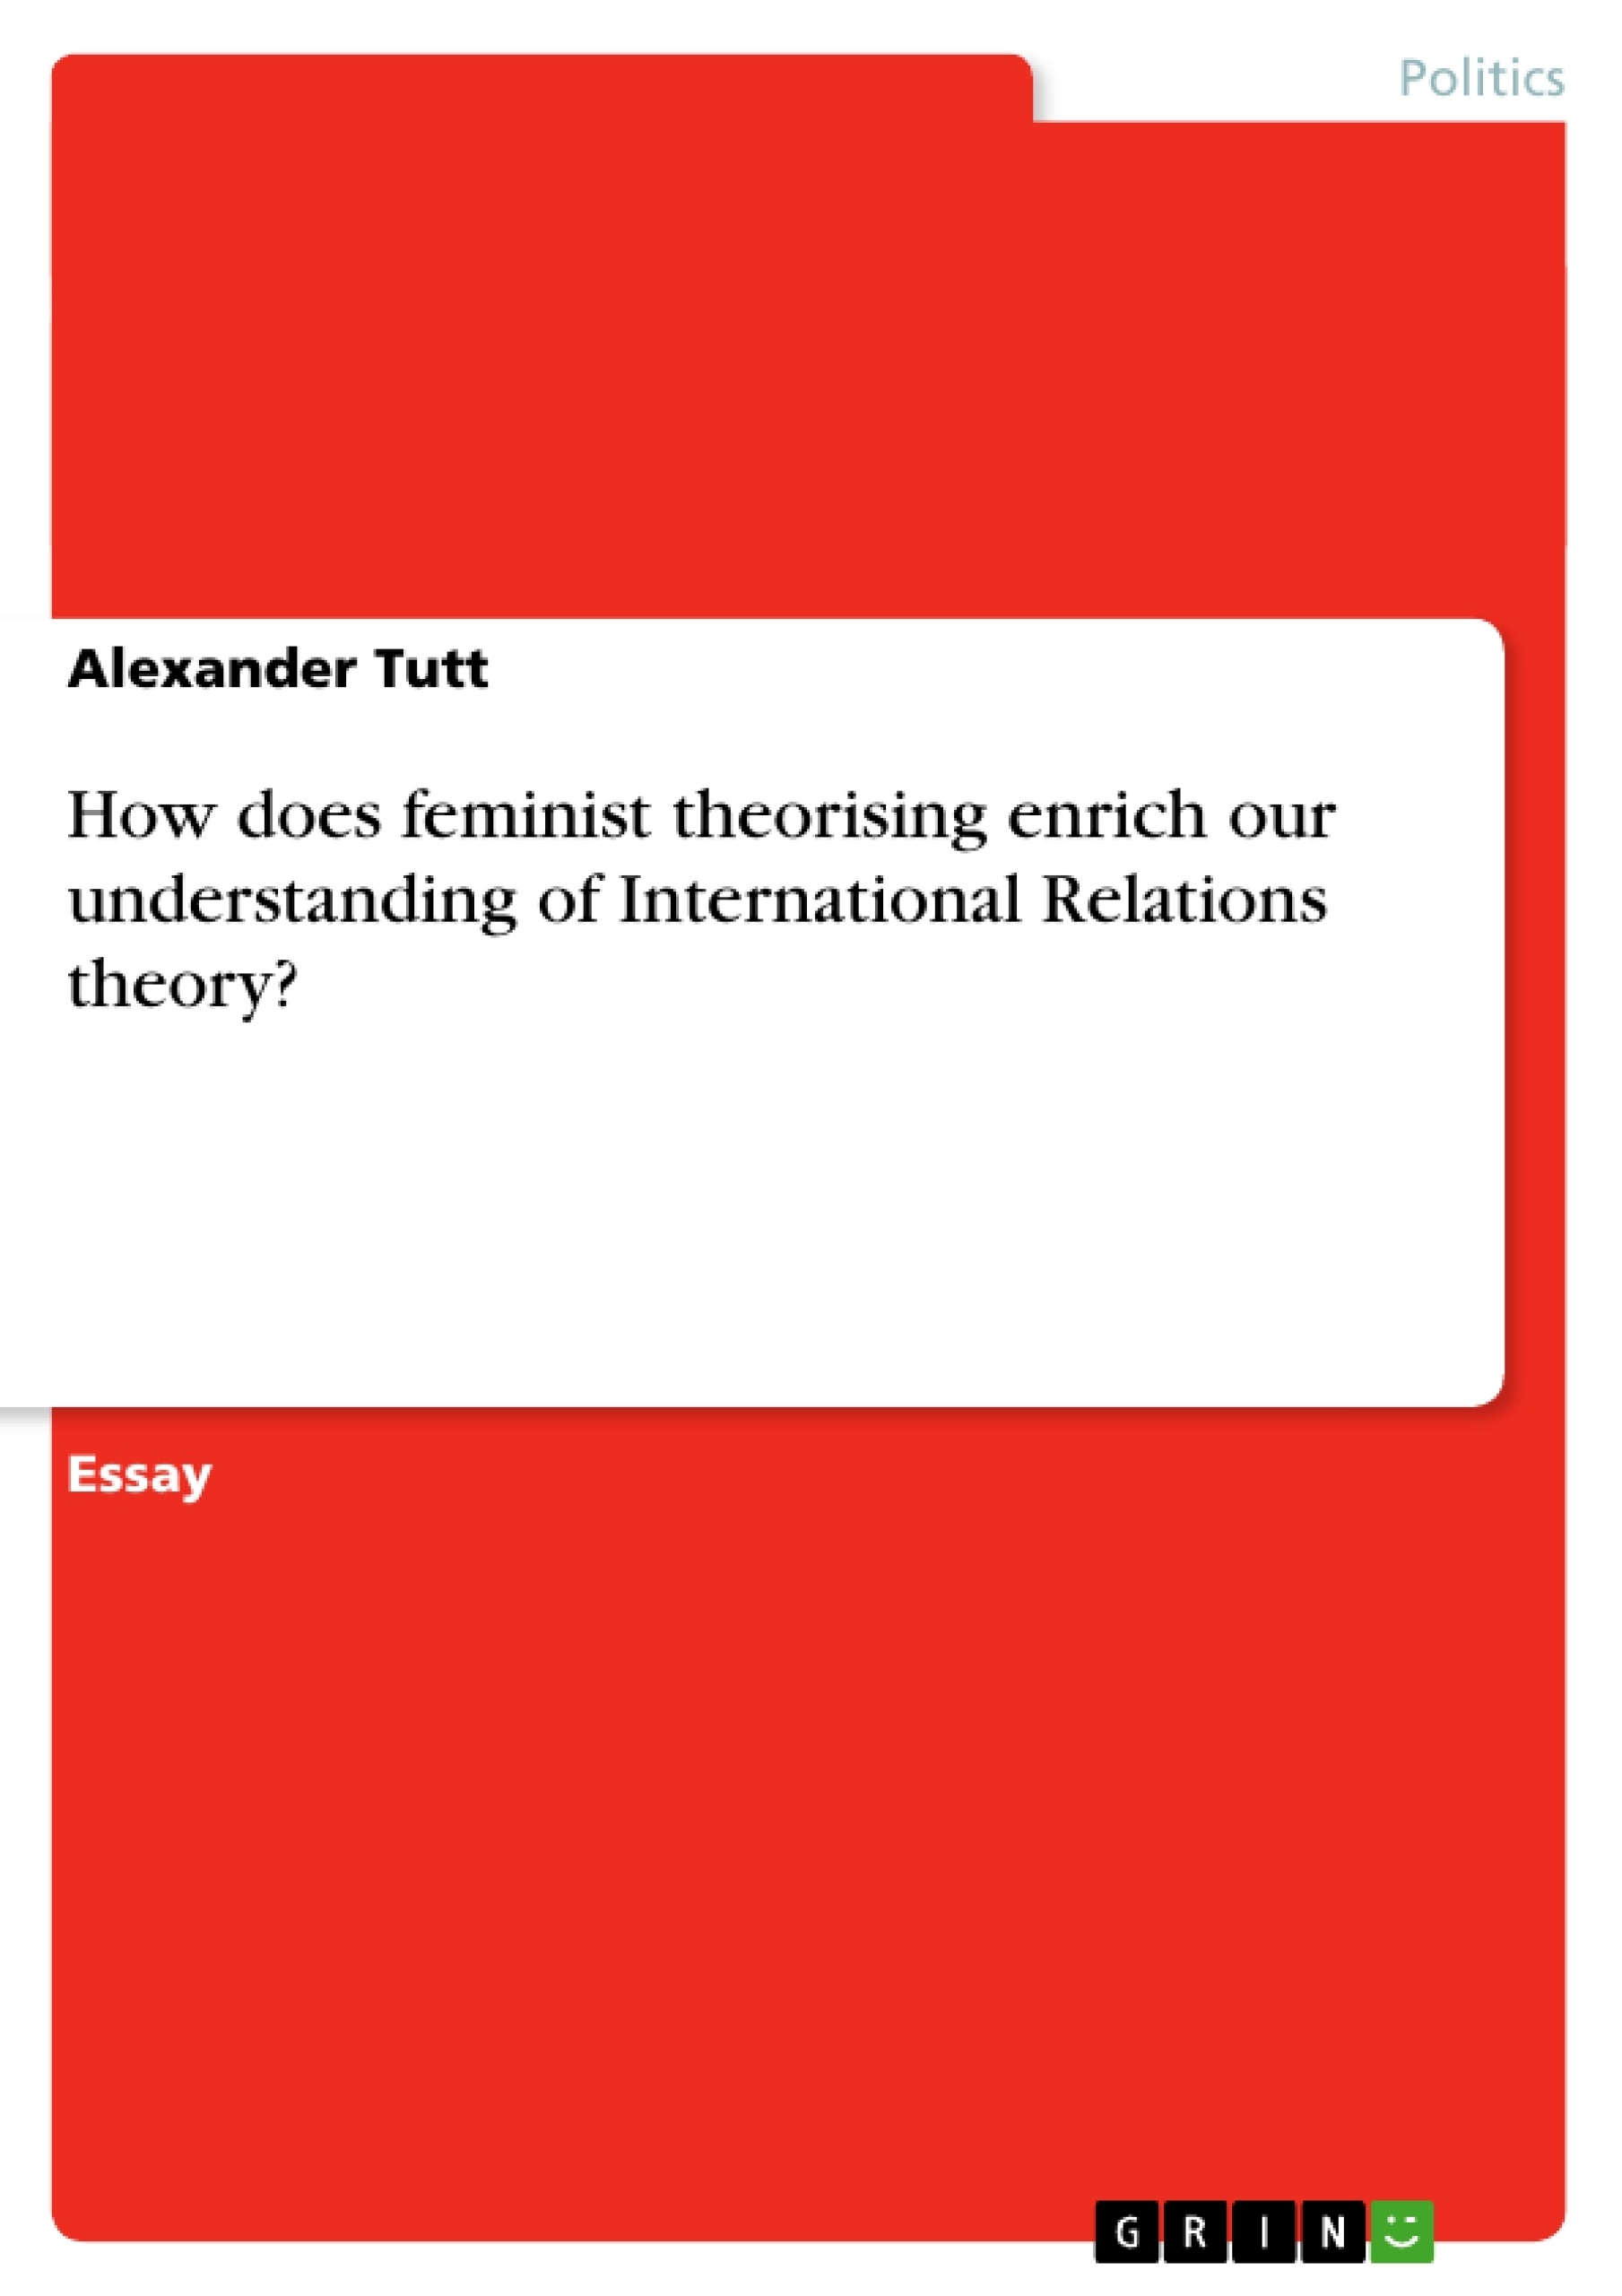 Título: How does feminist theorising enrich our understanding of International Relations theory?